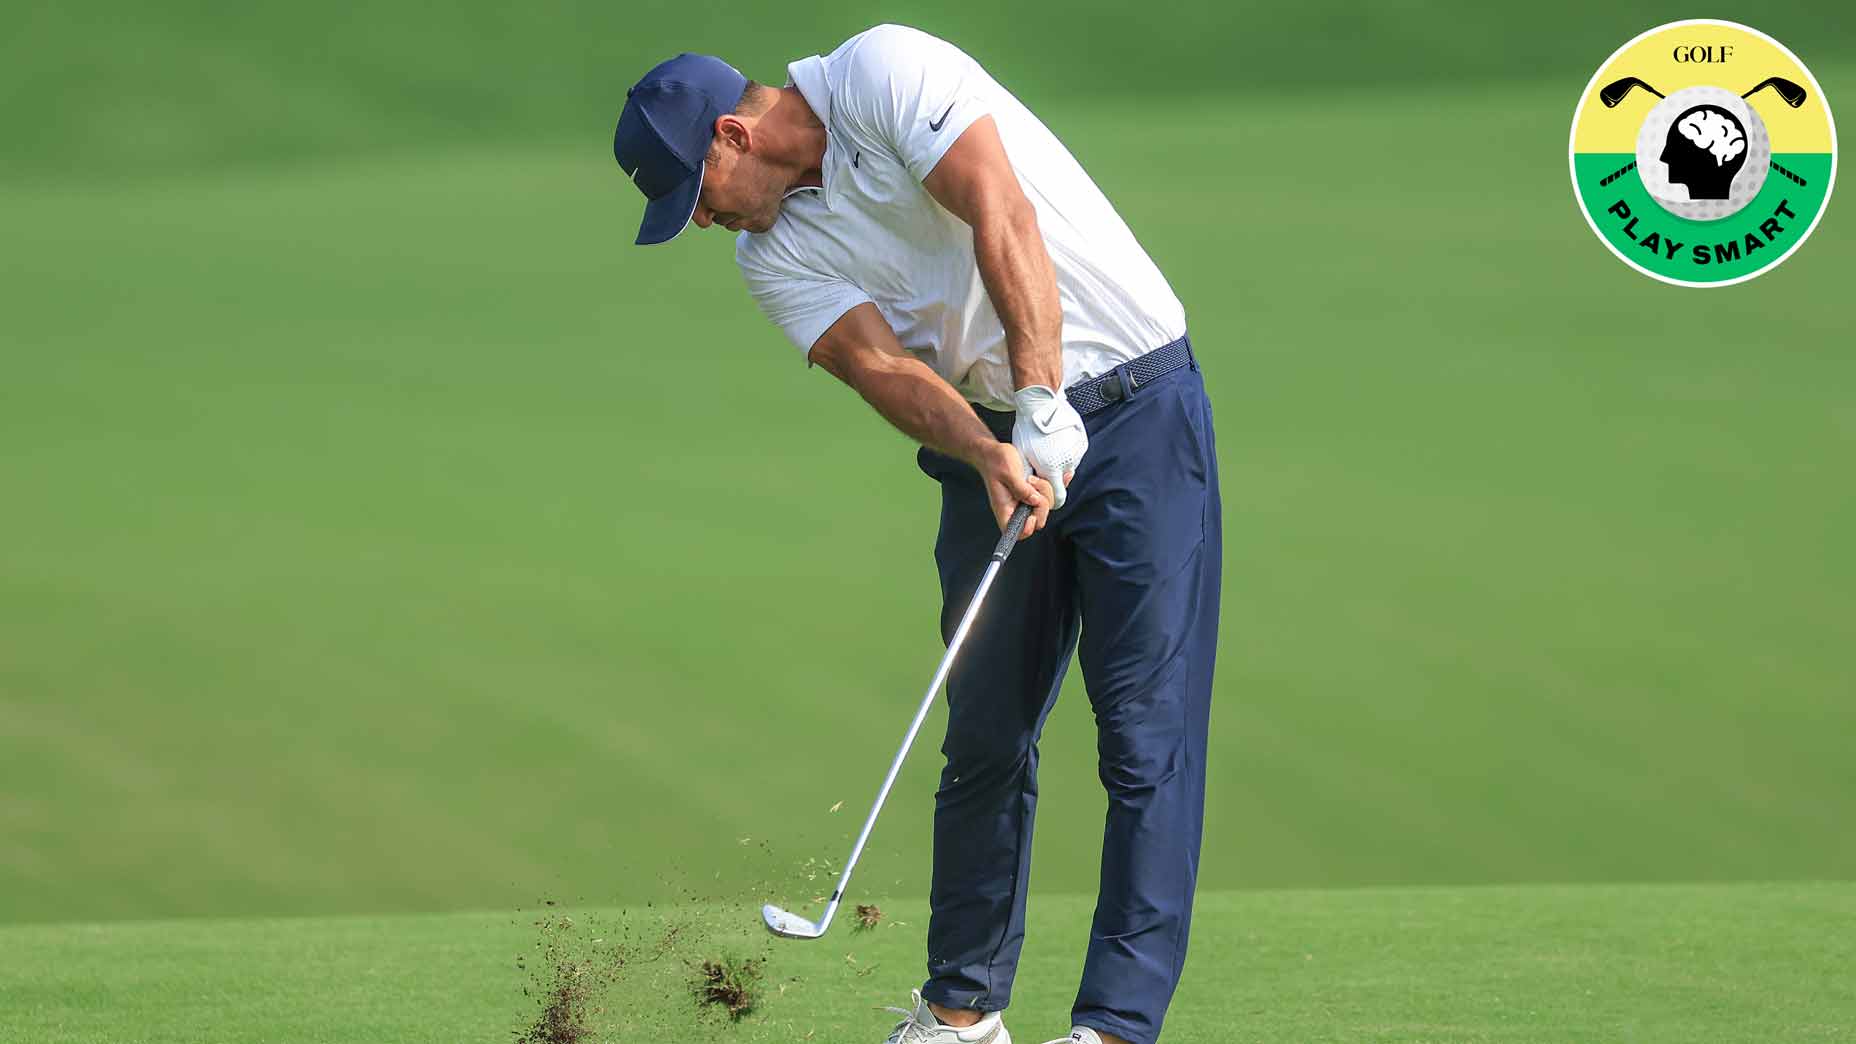 brooks koepka swings and makes a divot during the 2022 pga championship